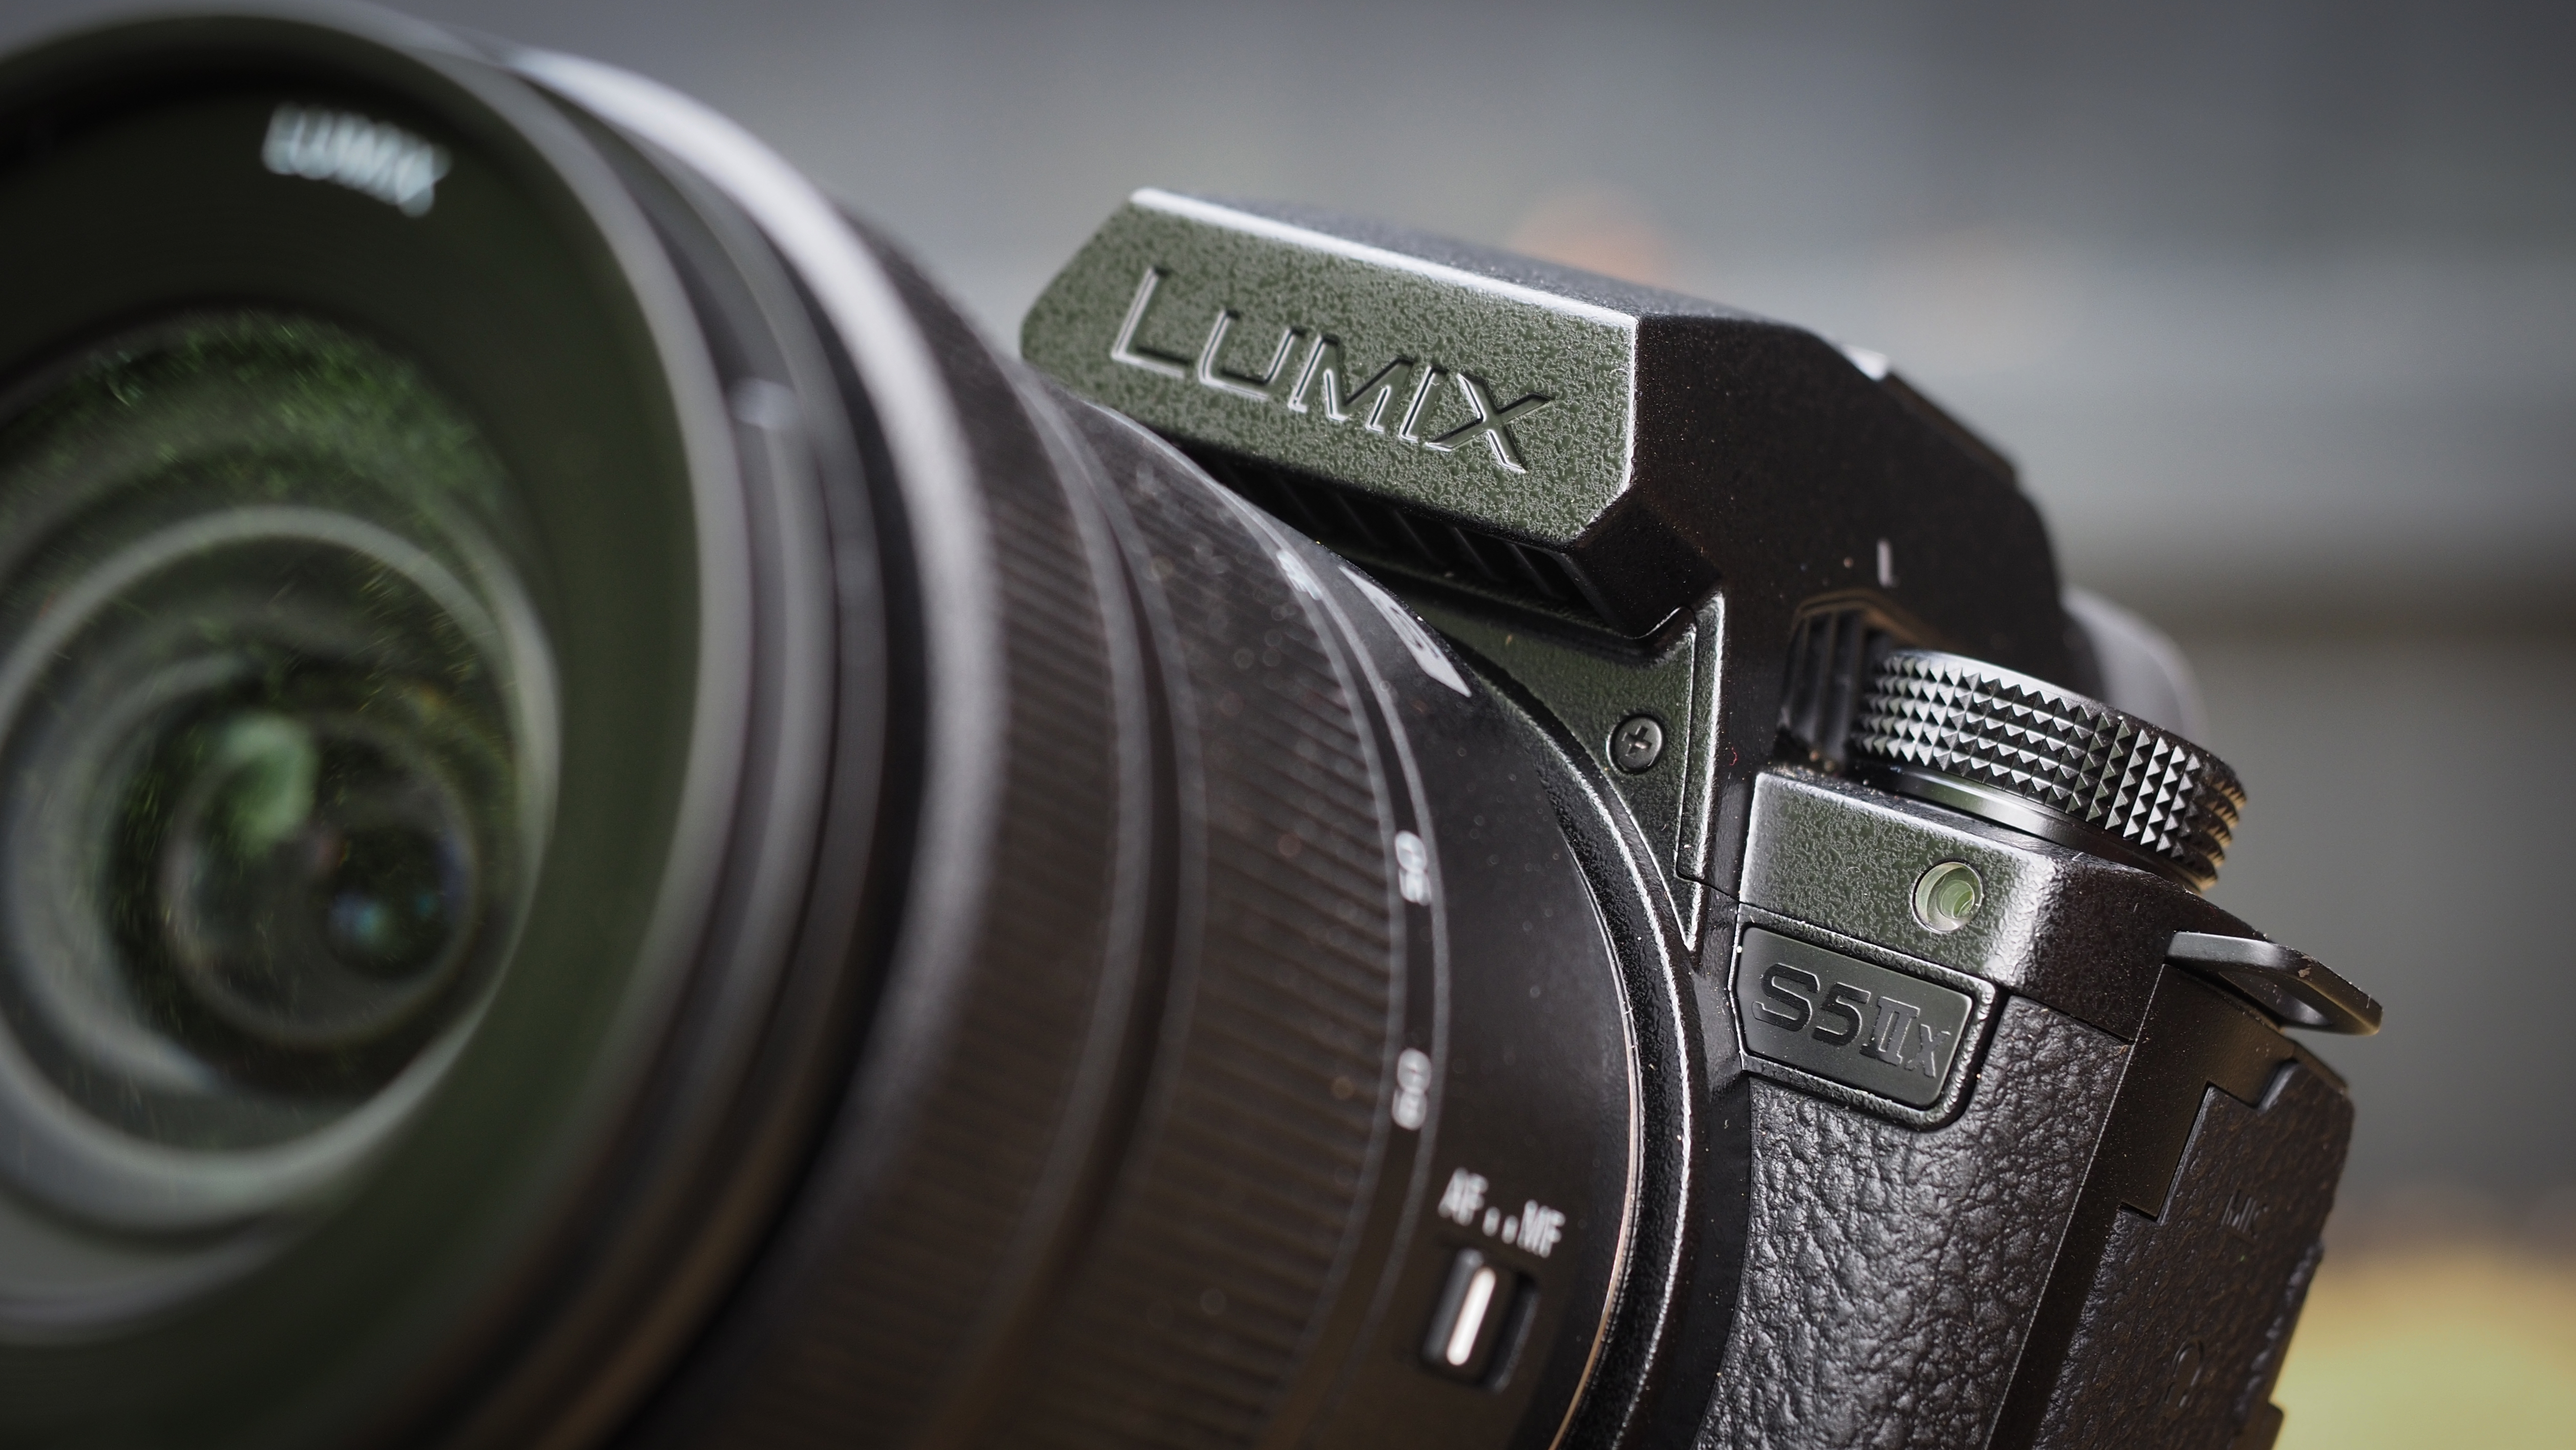 Close up view of the Panasonic Lumix S5 IIX badge and mode dial